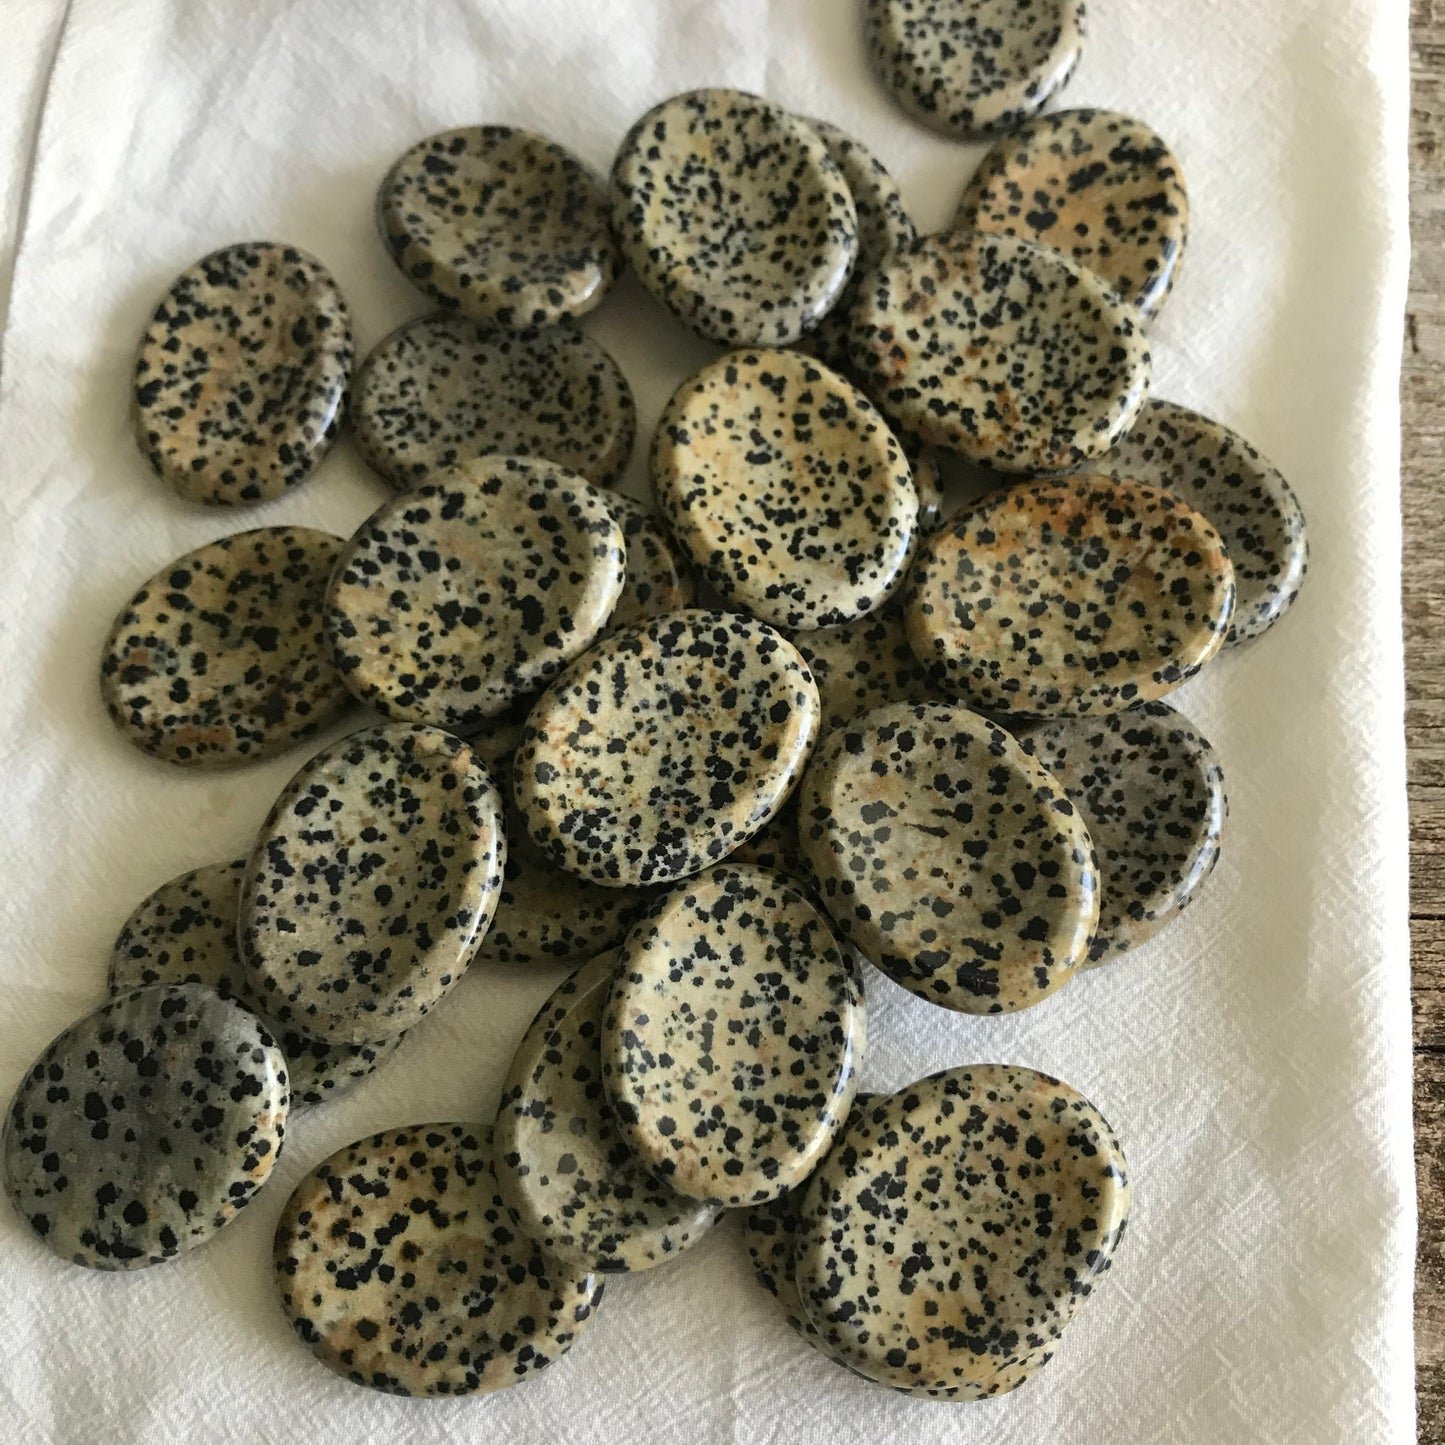 Dalmatian Jasper Worry Stone 1389 (Approx 1 1/2" - 1 3/4") Polished Stone for Wire Wrapping or Crystal Grid Supply